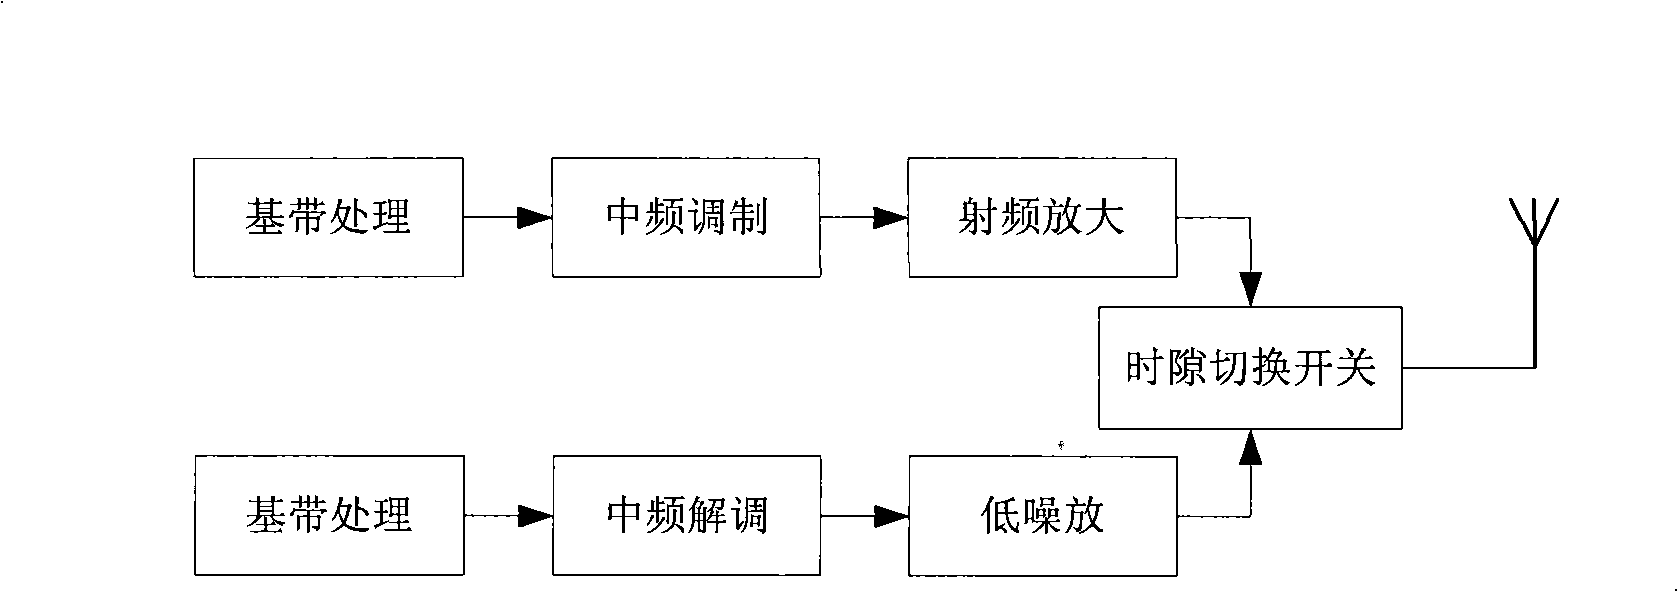 Relay node selection method of cooperation communication